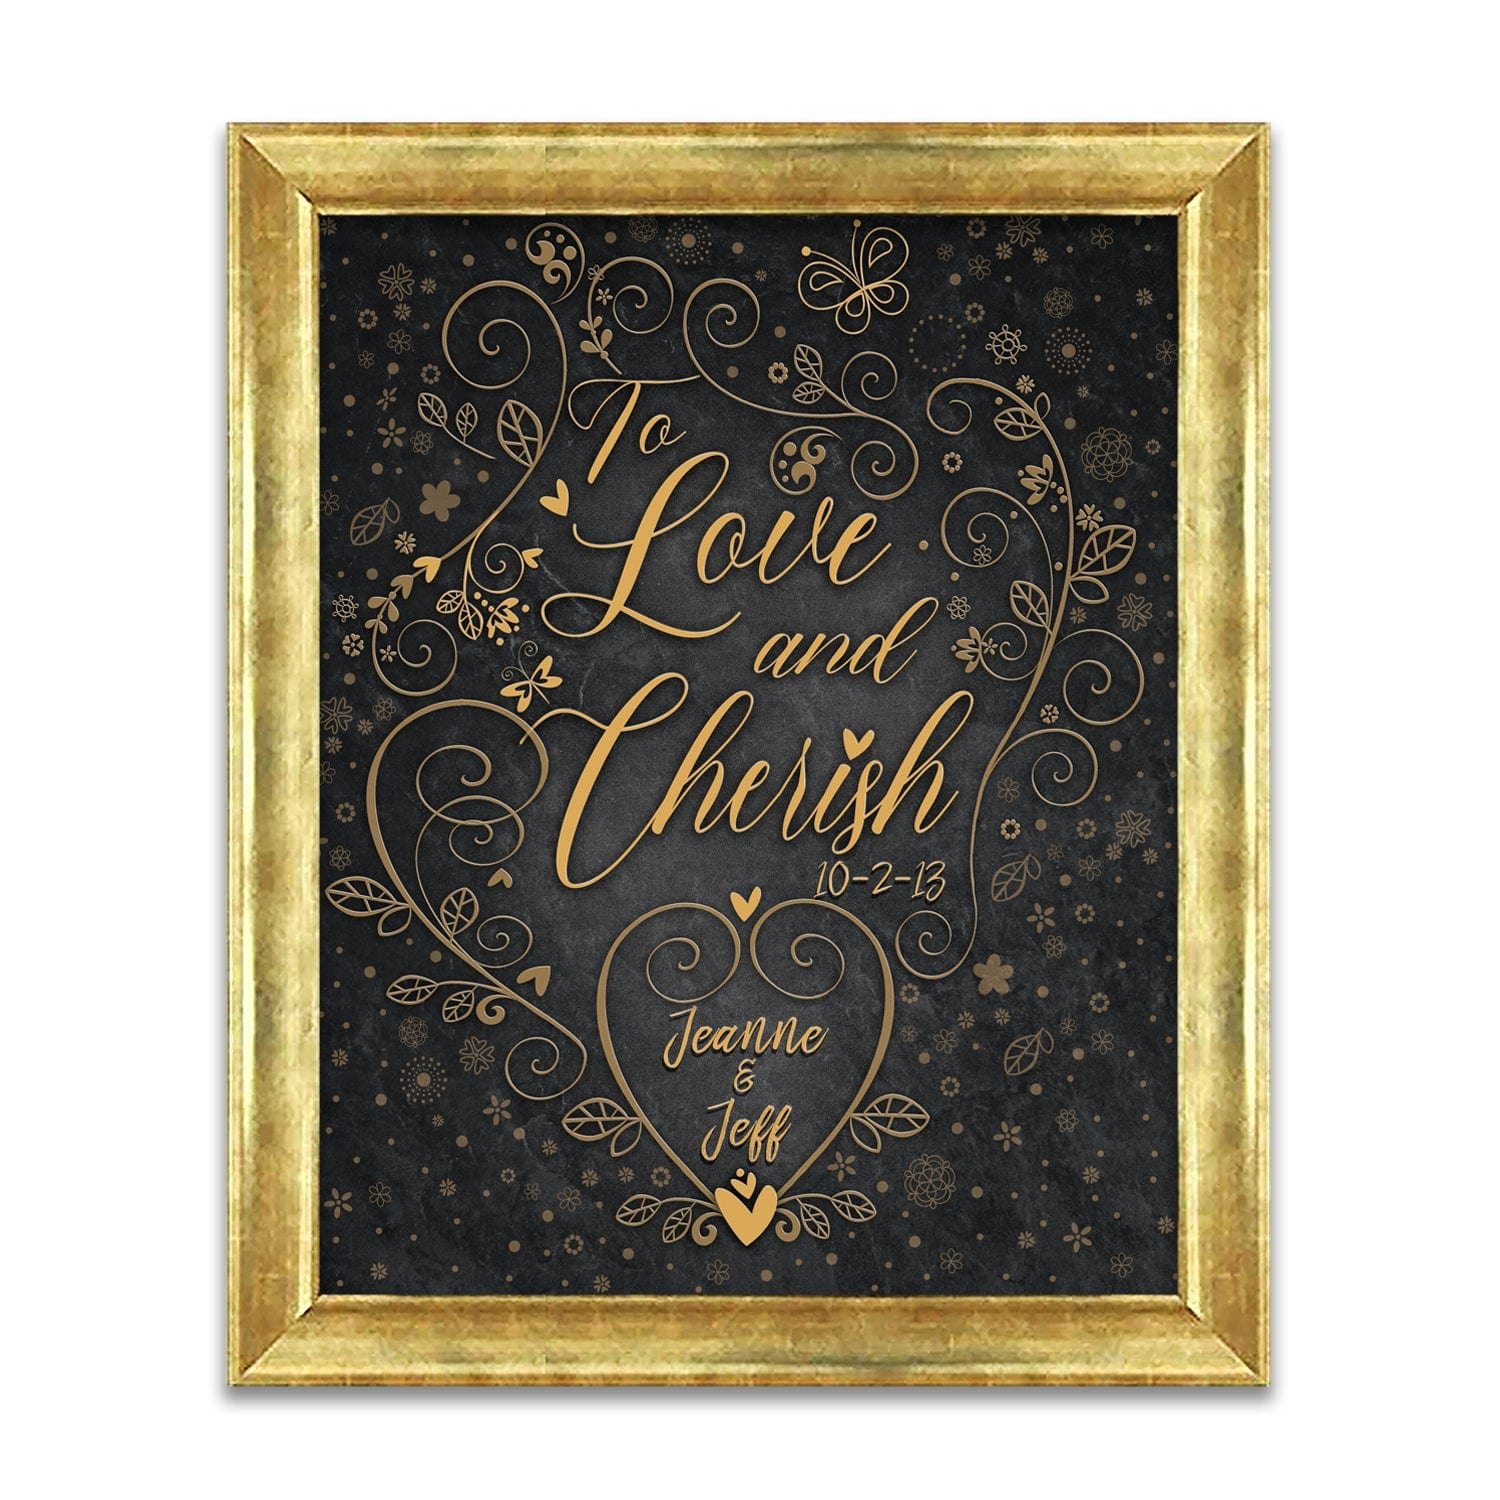 To Love and Cherish | Personalized Wedding Gift | Framed Canvas Personalized Art for Weddings